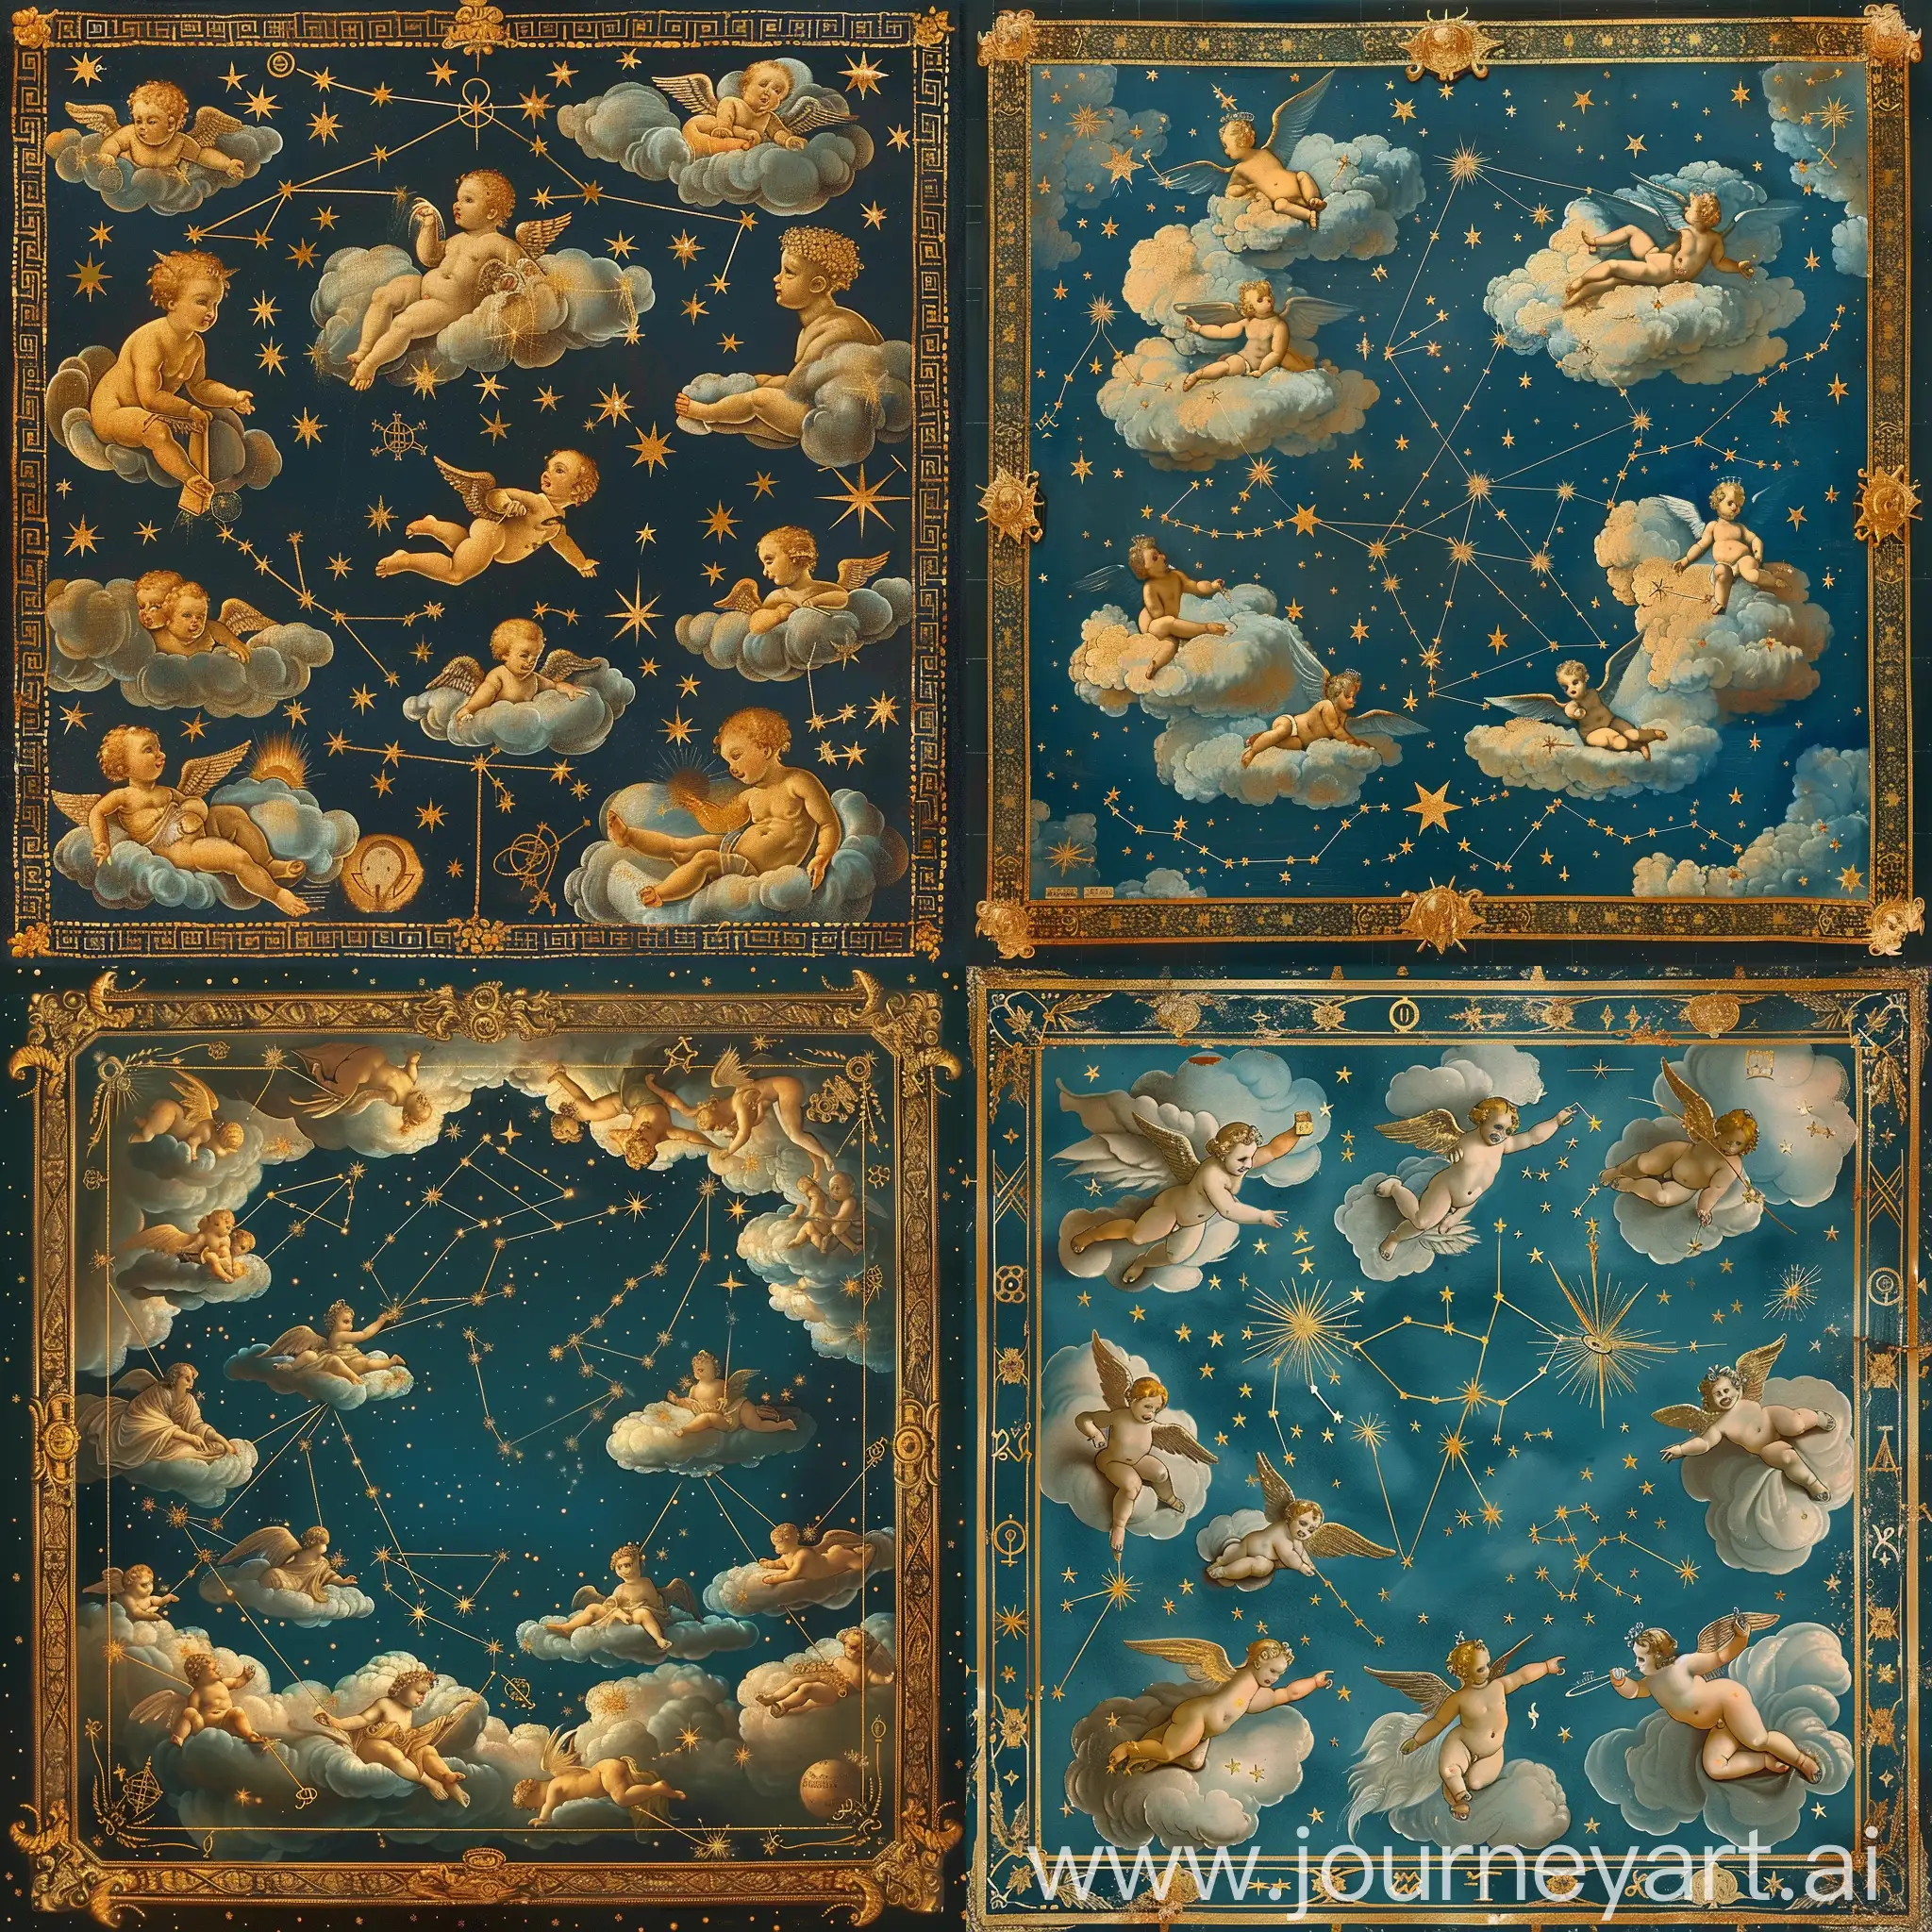 Celestial-Baroque-Sky-with-Golden-Stars-Gods-and-Angels